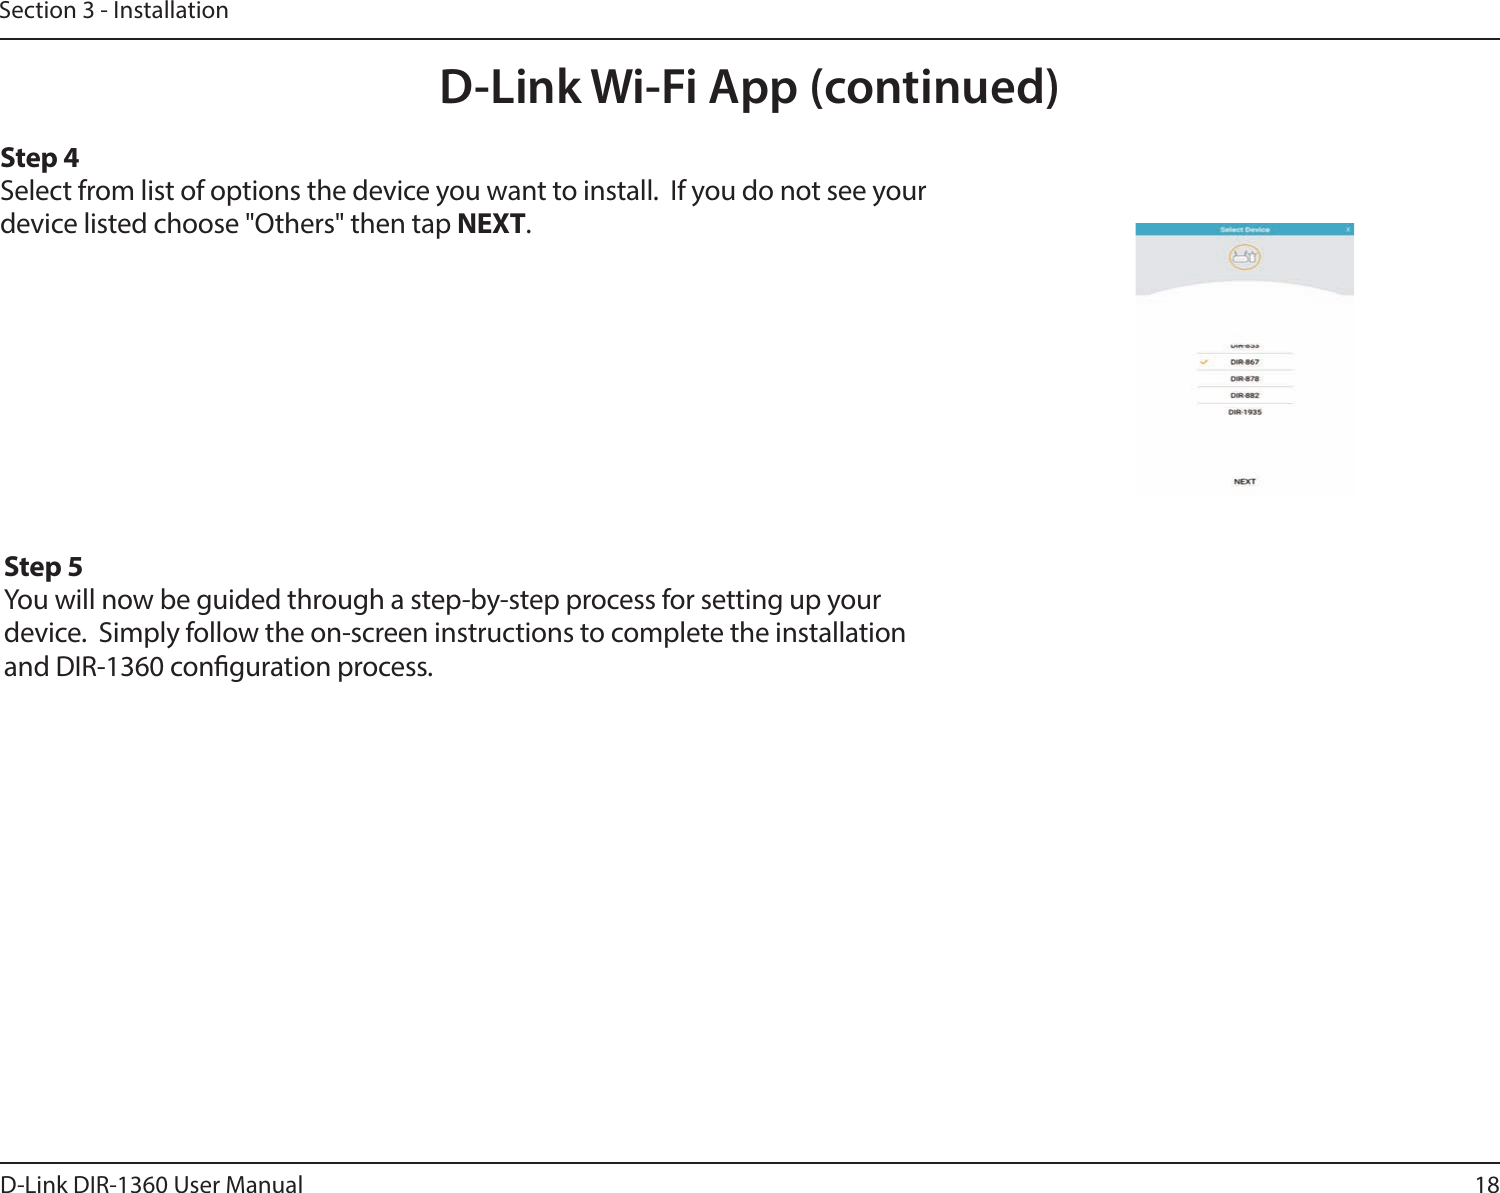 18D-Link DIR-1360 User ManualSection 3 - InstallationD-Link Wi-Fi App (continued)Step 4Select from list of options the device you want to install.  If you do not see your device listed choose &quot;Others&quot; then tap NEXT.Step 5You will now be guided through a step-by-step process for setting up your device.  Simply follow the on-screen instructions to complete the installation and DIR-1360 conguration process.